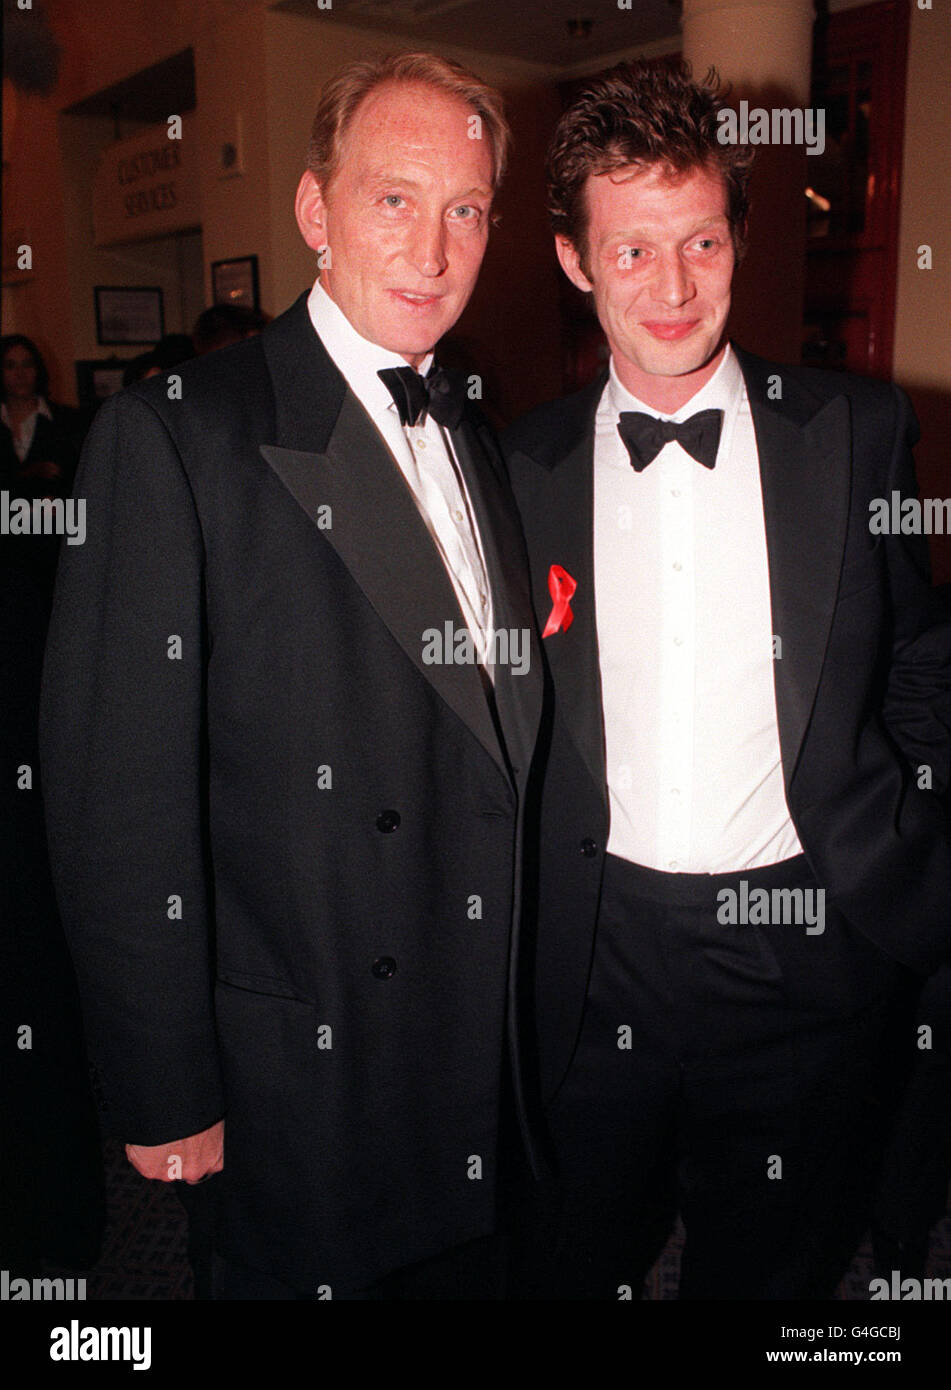 PA NEWS PHOTO 5/12/98 ACTORS CHARLES DANCE (LEFT) AND JASON FLEMYNG AT THE EUROPEAN FILM AWARDS, HELD AT LONDON'S OLD VIC THEATRE. Stock Photo